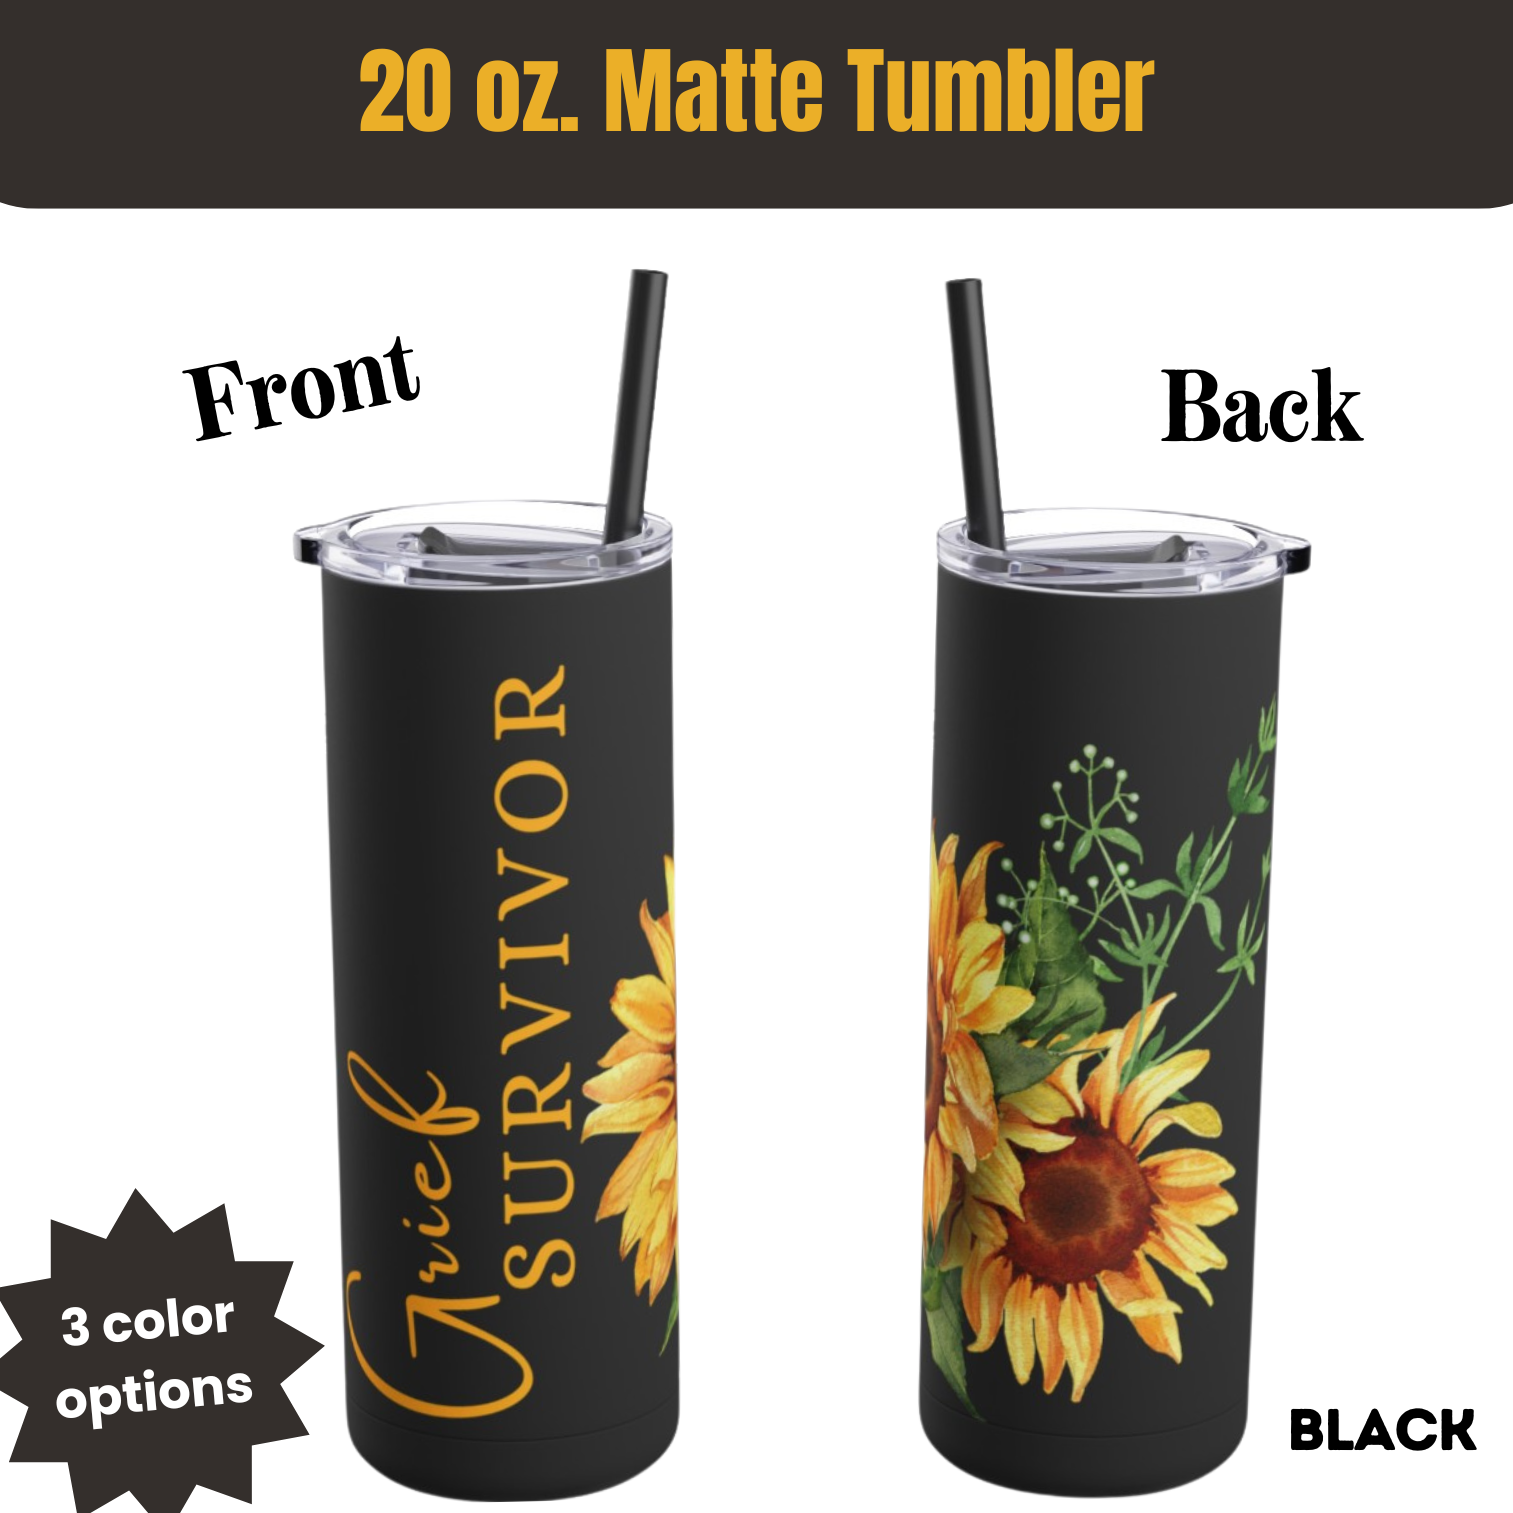 20 oz Matte Tumbler: Unique sympathy gift for your friend or family member to pay tribute to their loss, silently express their journey and honor their resilience.